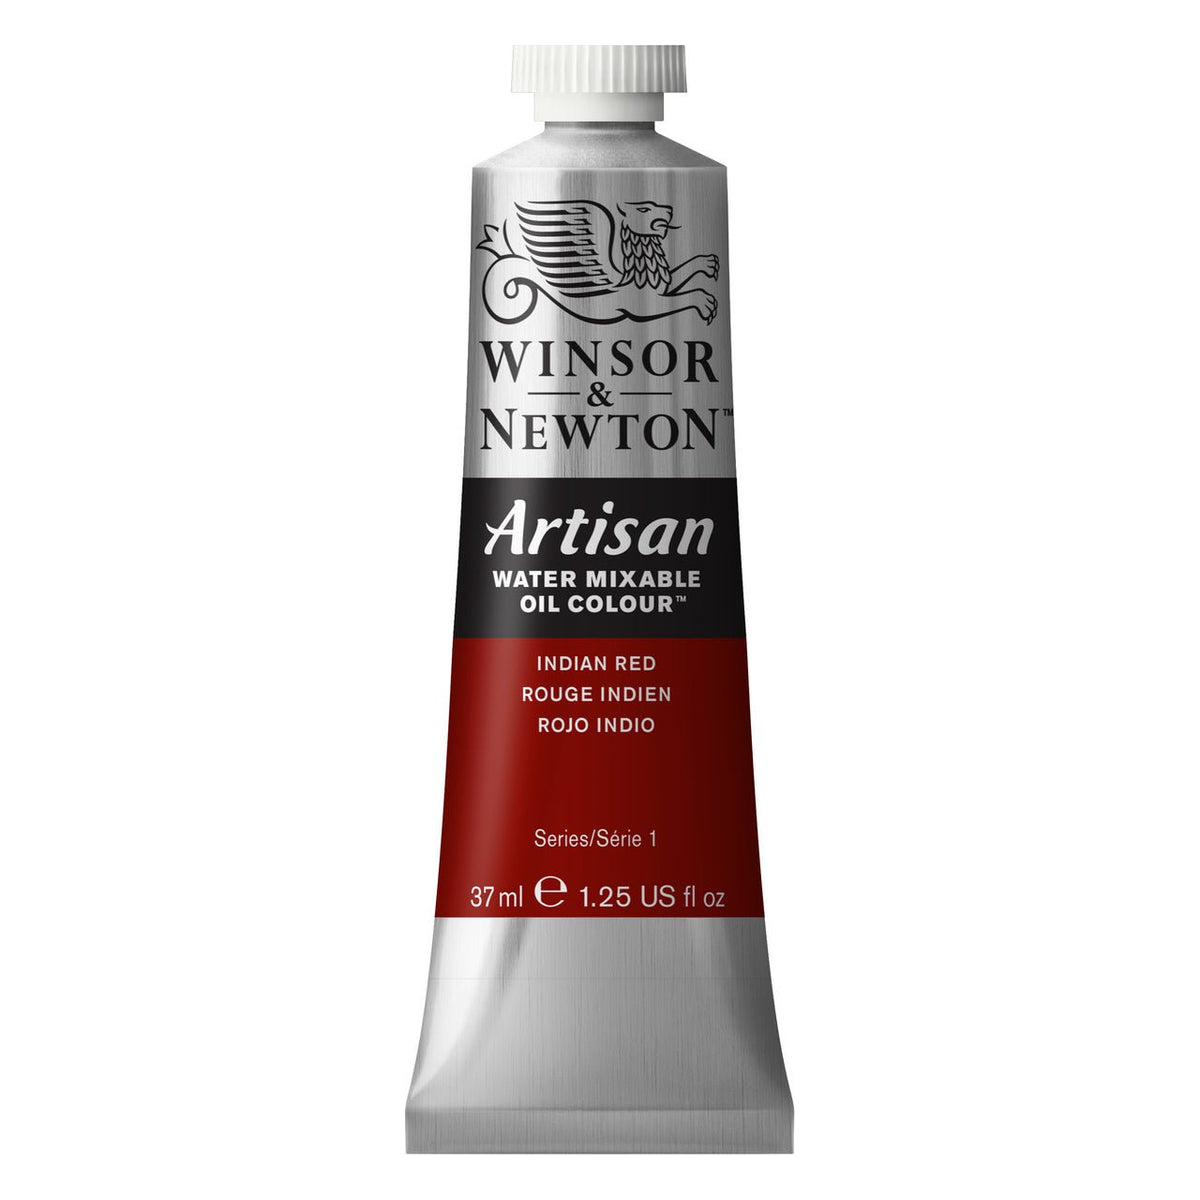 Winsor & Newton Artisan Water Mixable Oil 37ml - Indian Red - merriartist.com